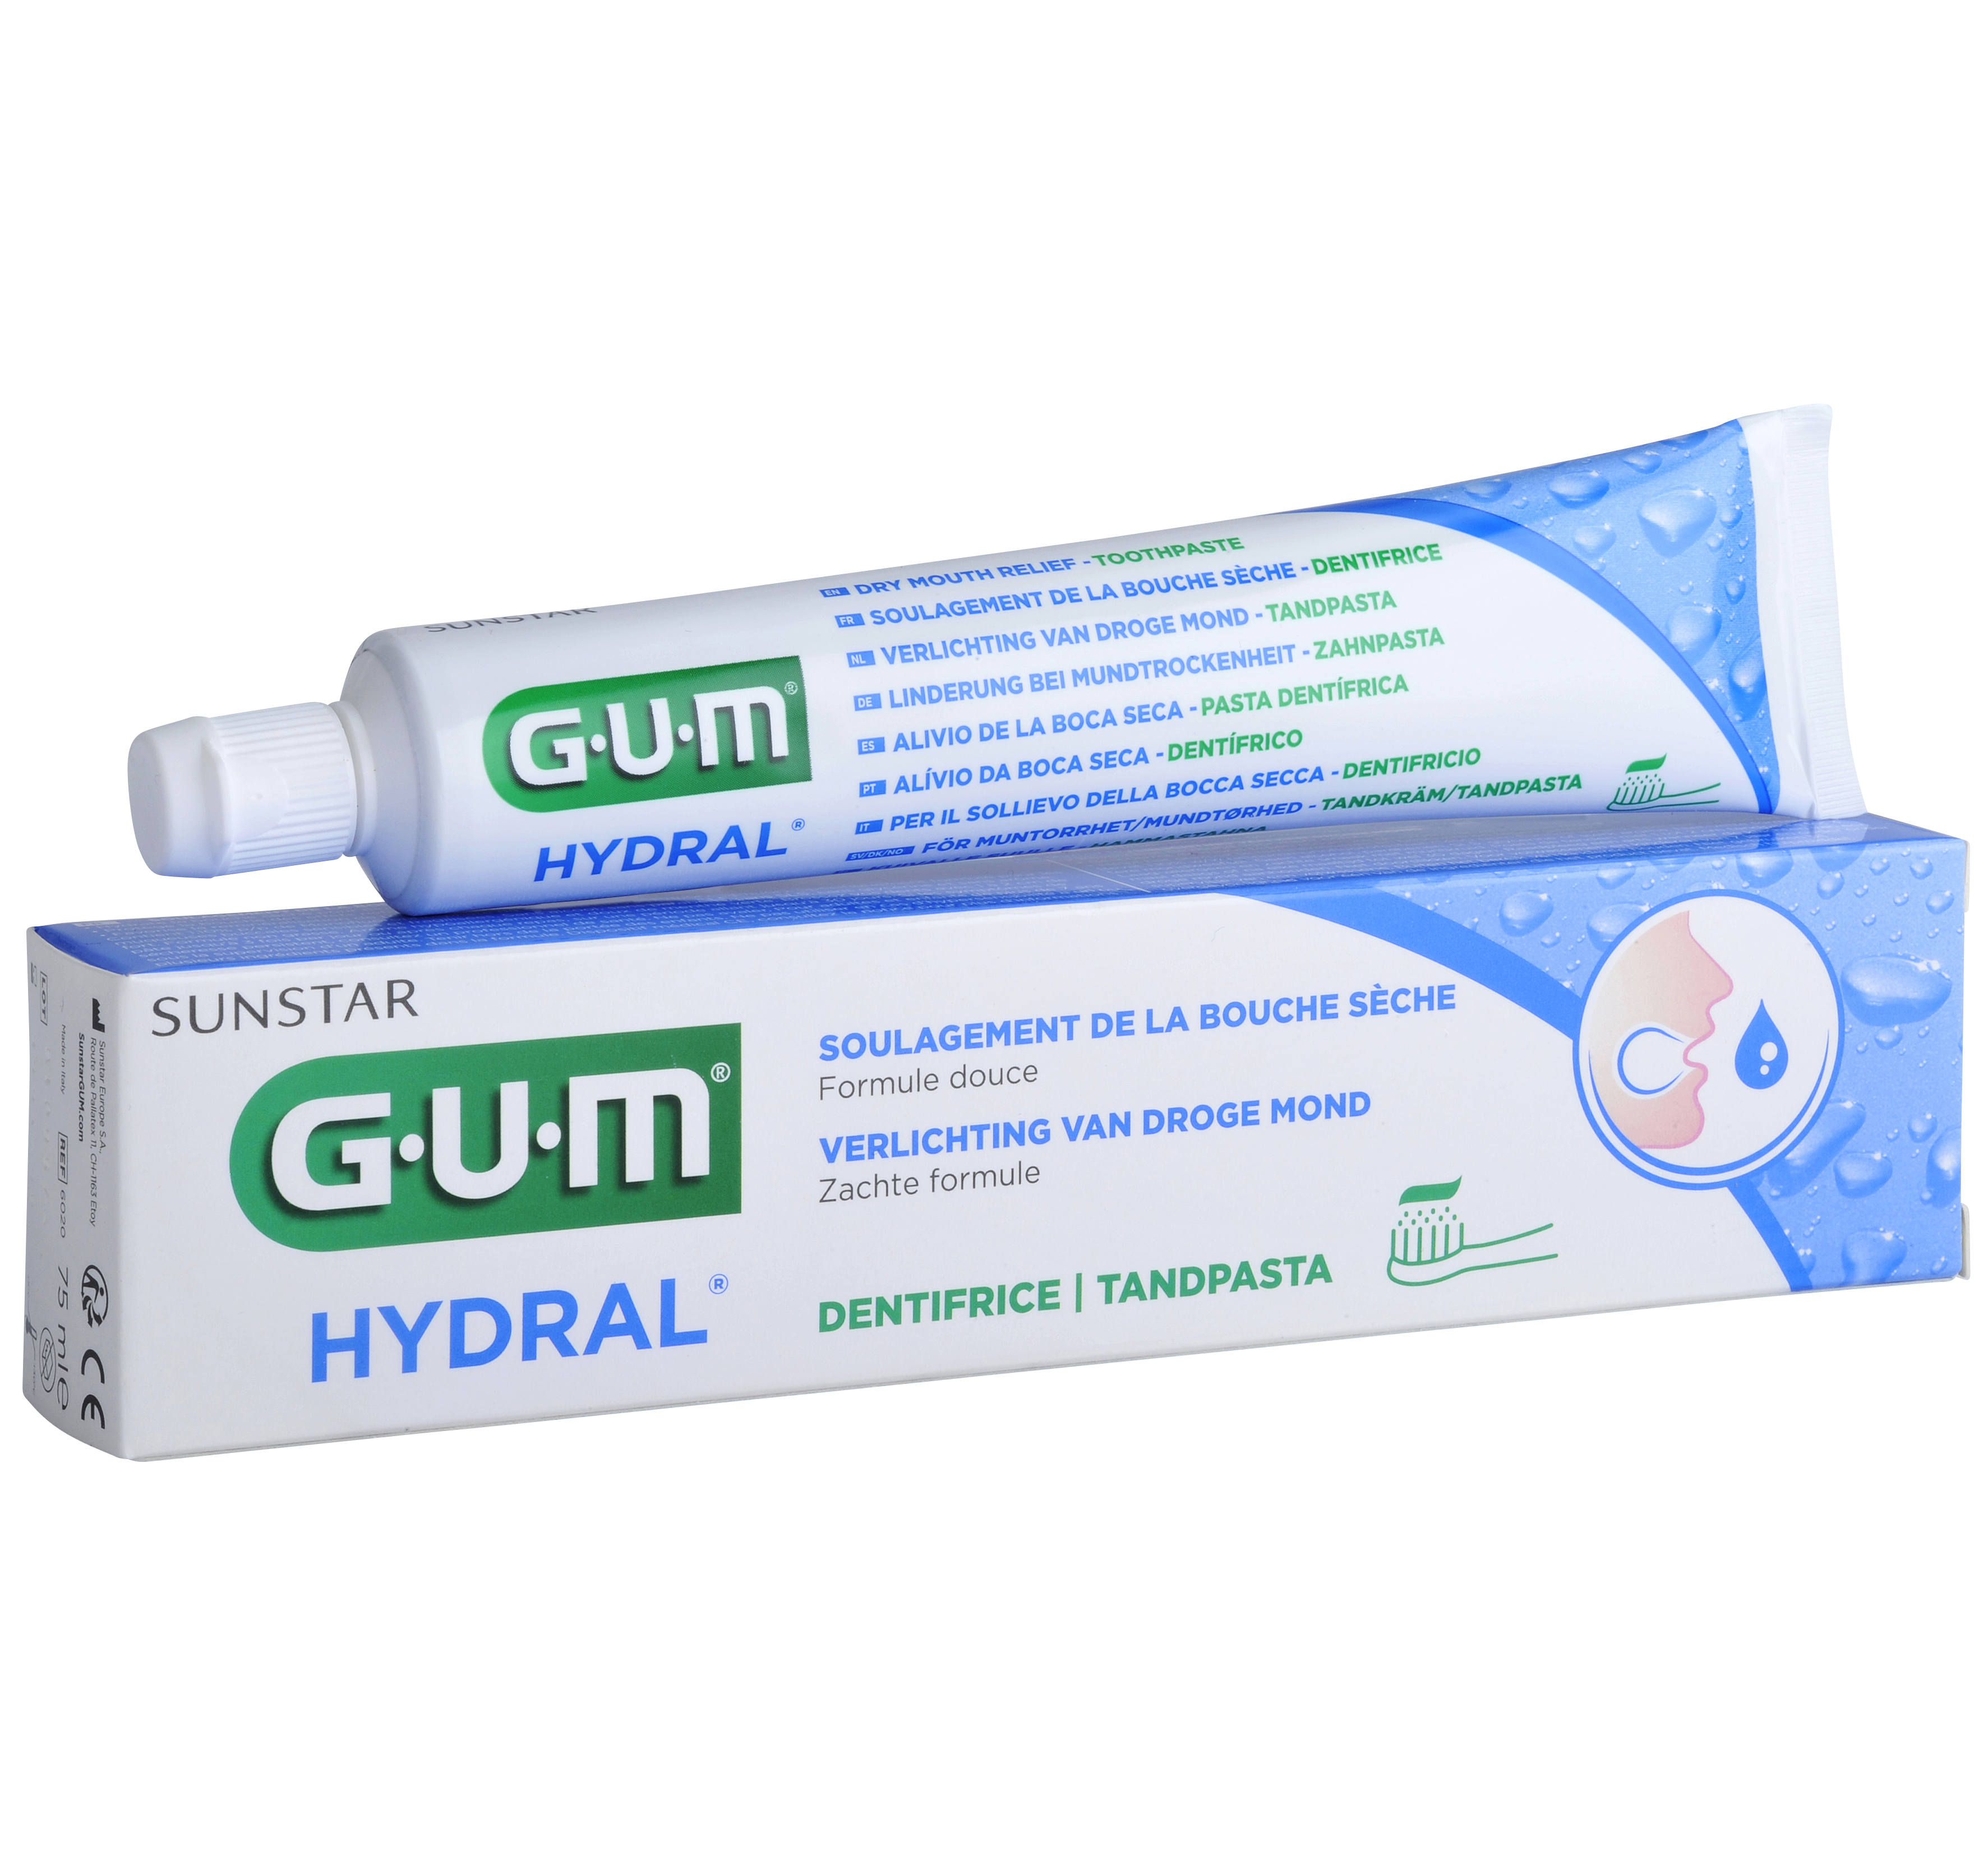 P6020-FR-NL-GUM-HYDRAL-Toothpaste-75ml-Box-Tube.png